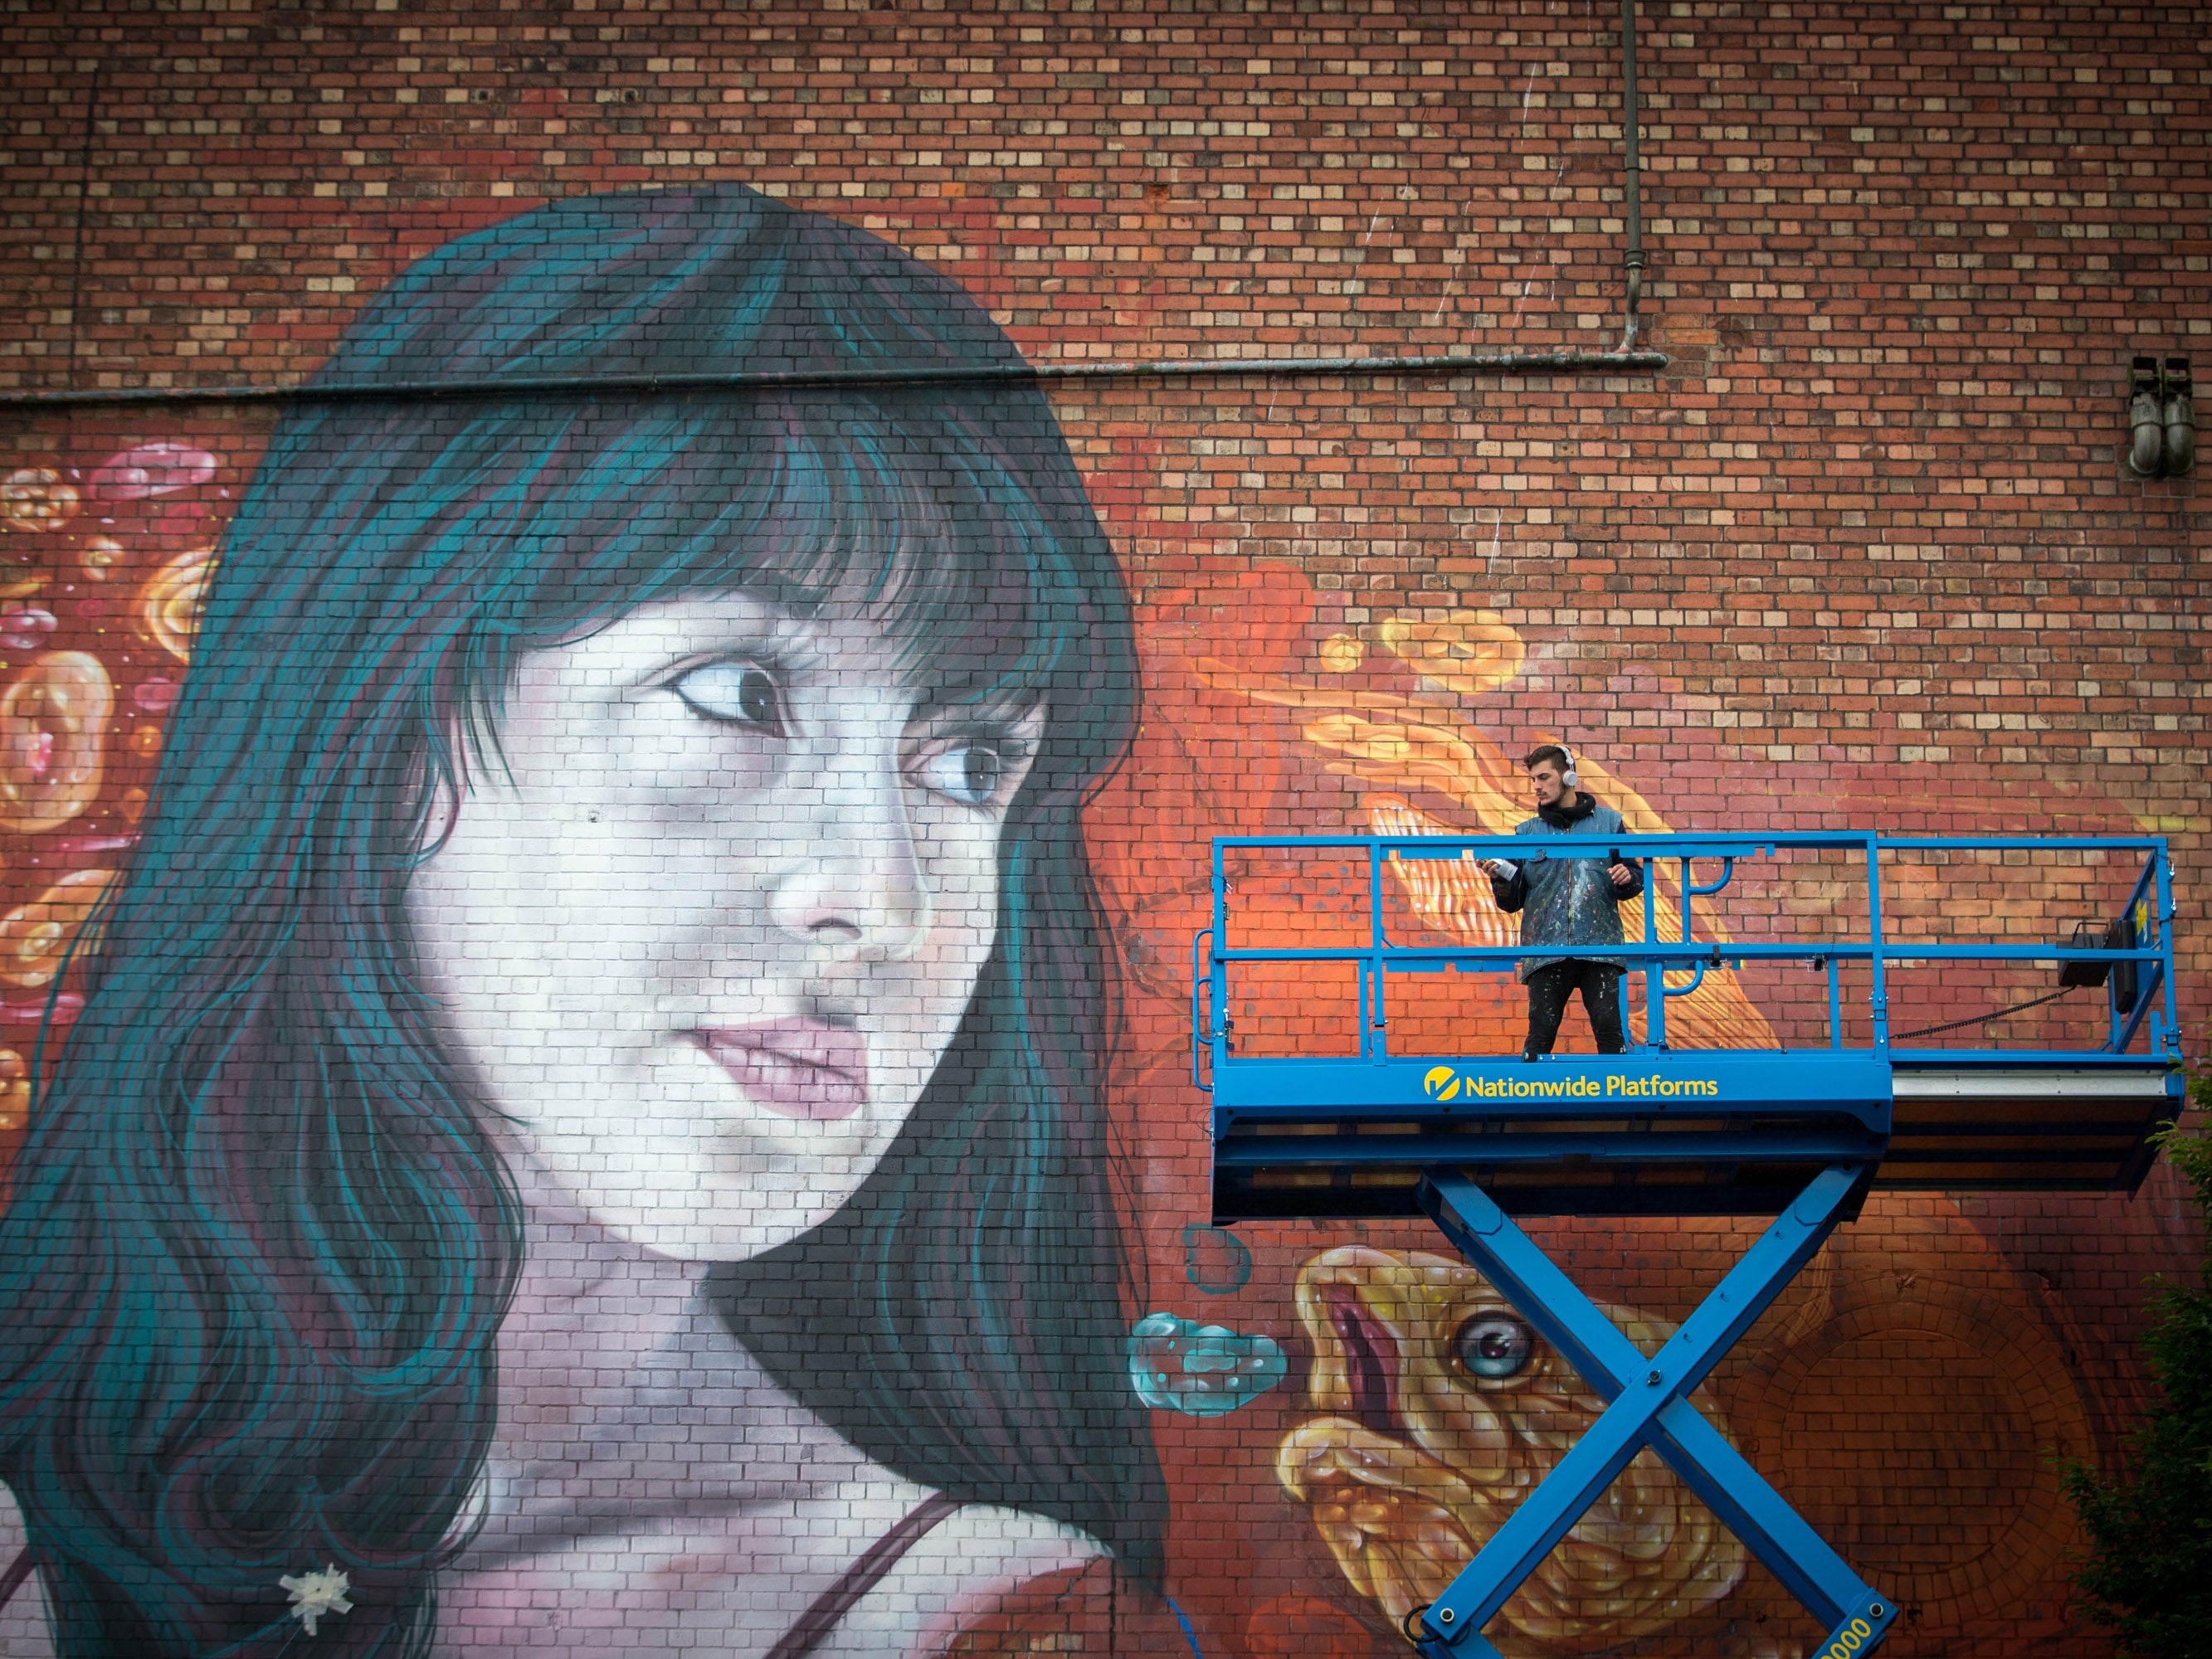 An artist works on artist Martin Ron's mural on the side of the Tobacco Factory in Bedminster